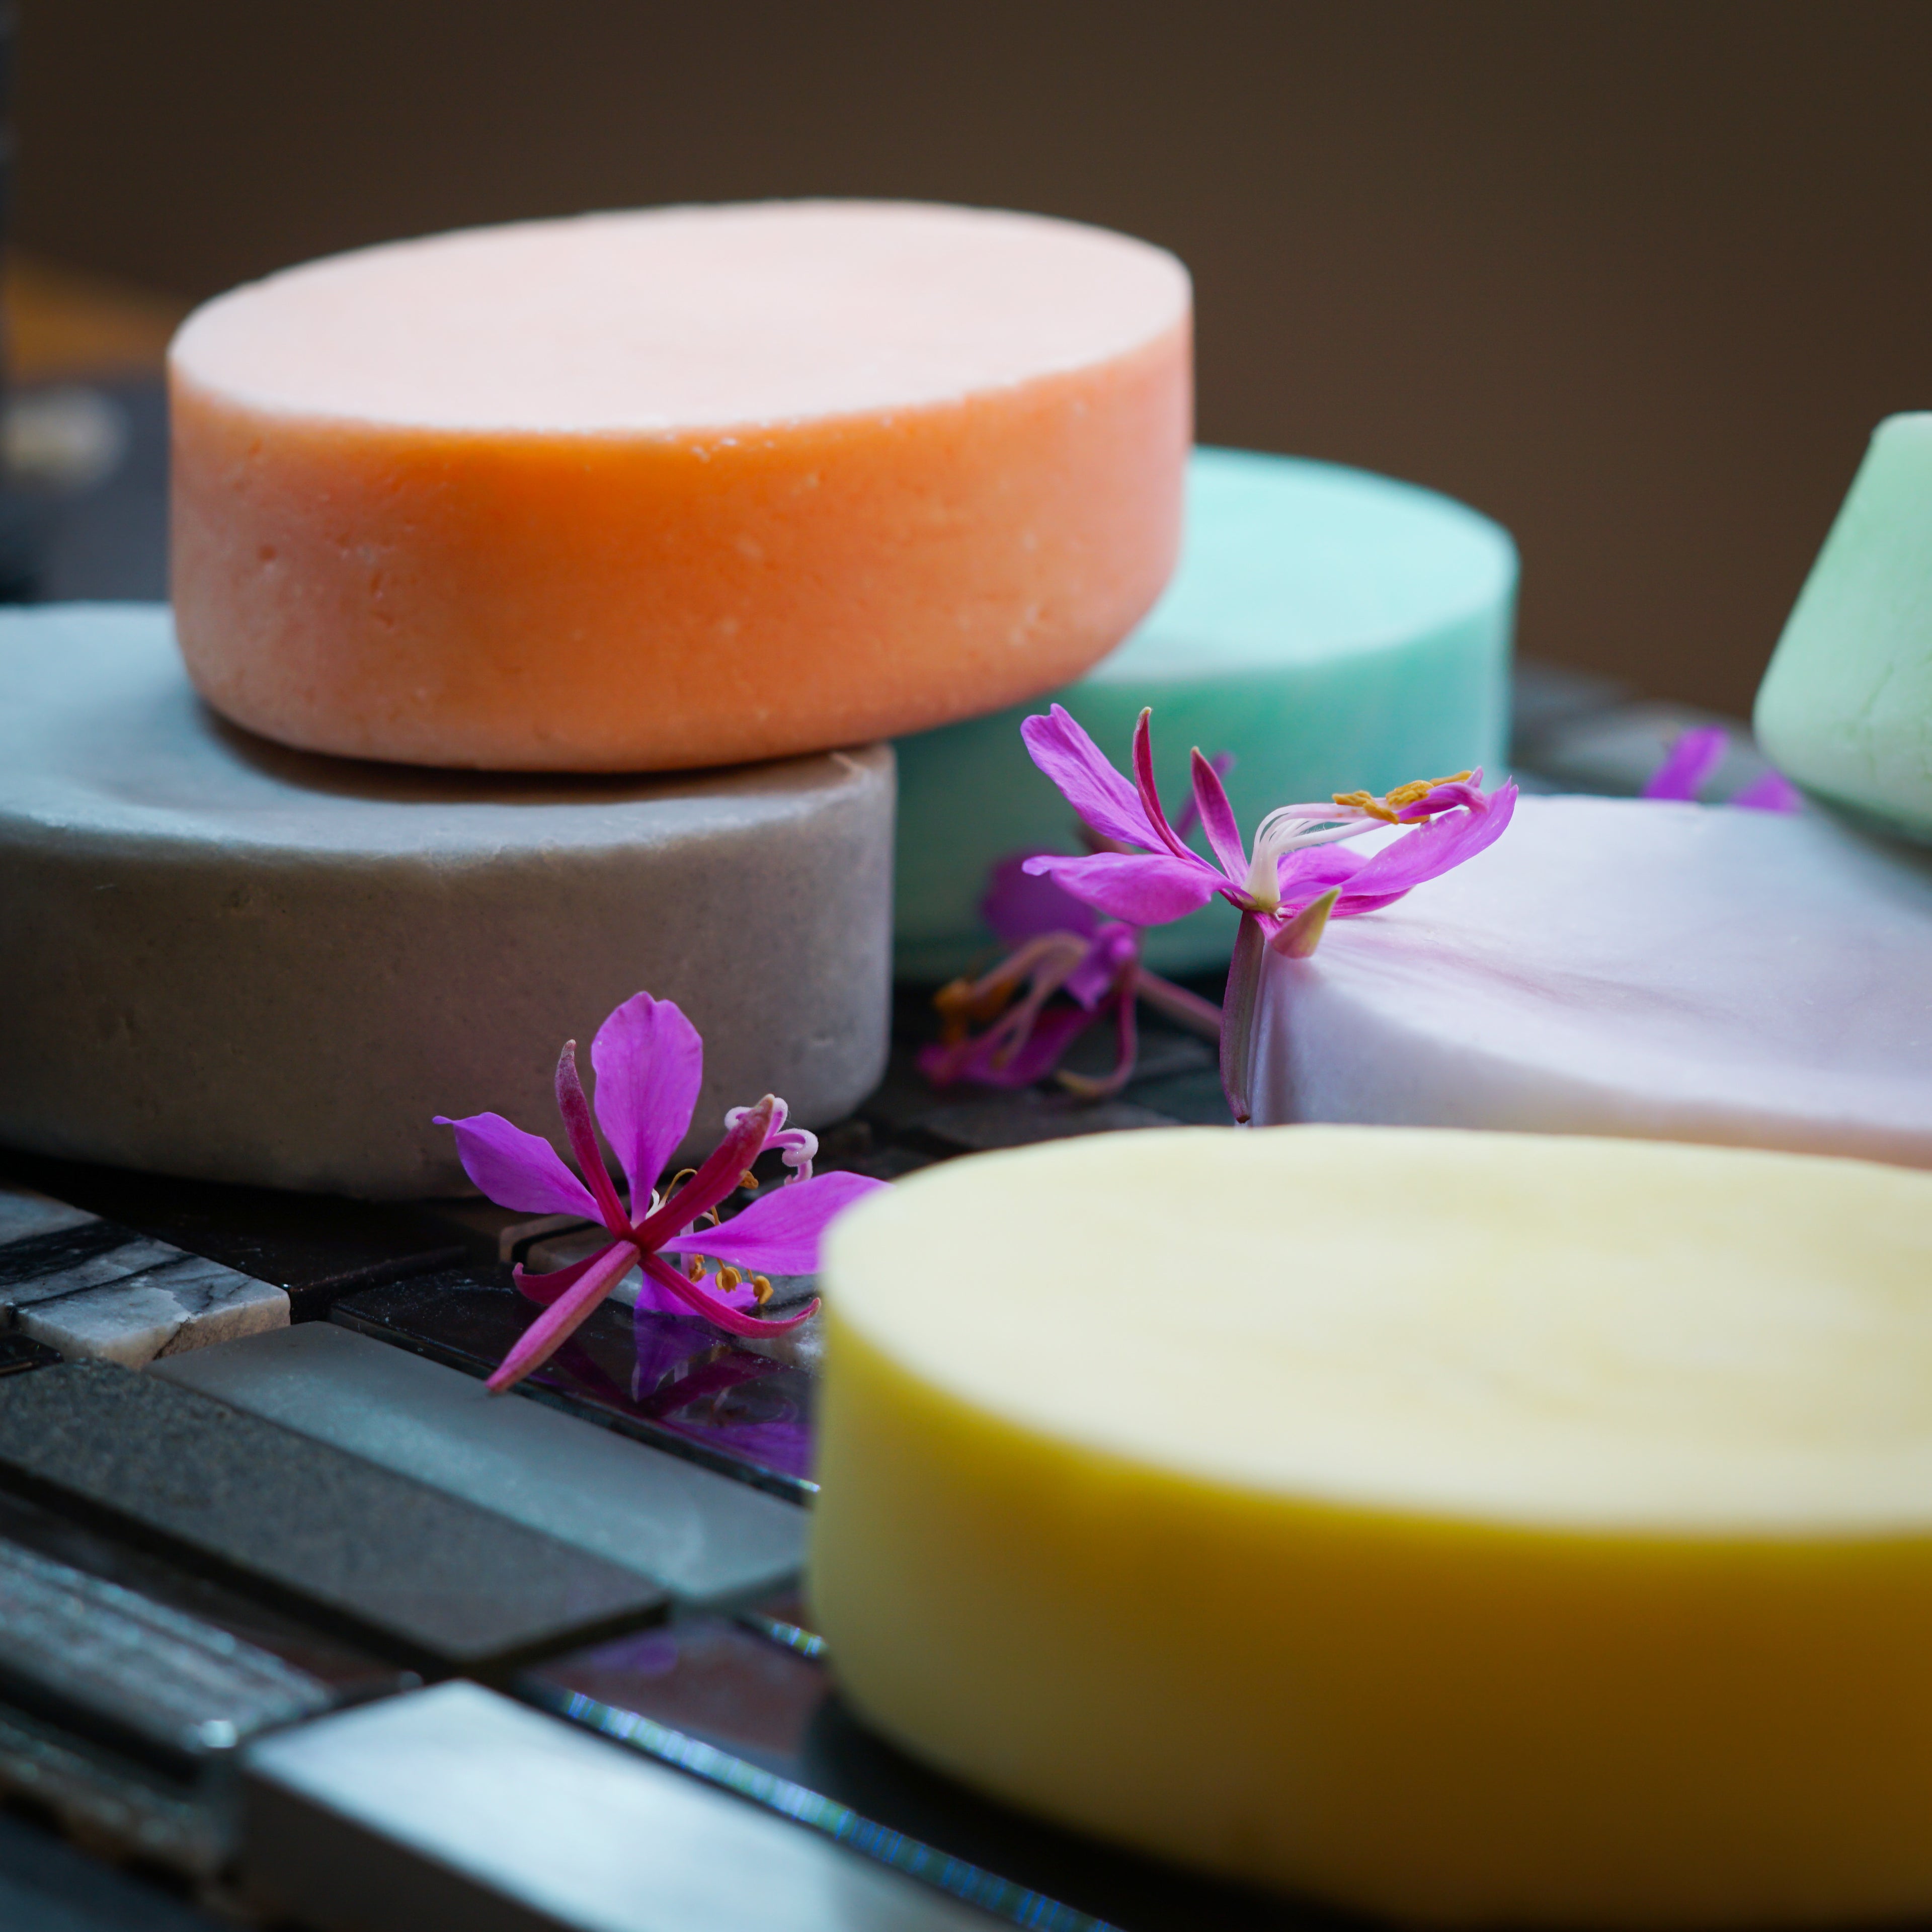 Hydration shampoo bars sitting on a shiny colourful surface. Pink flowers used as decorations on top of the lavender shampoo bar